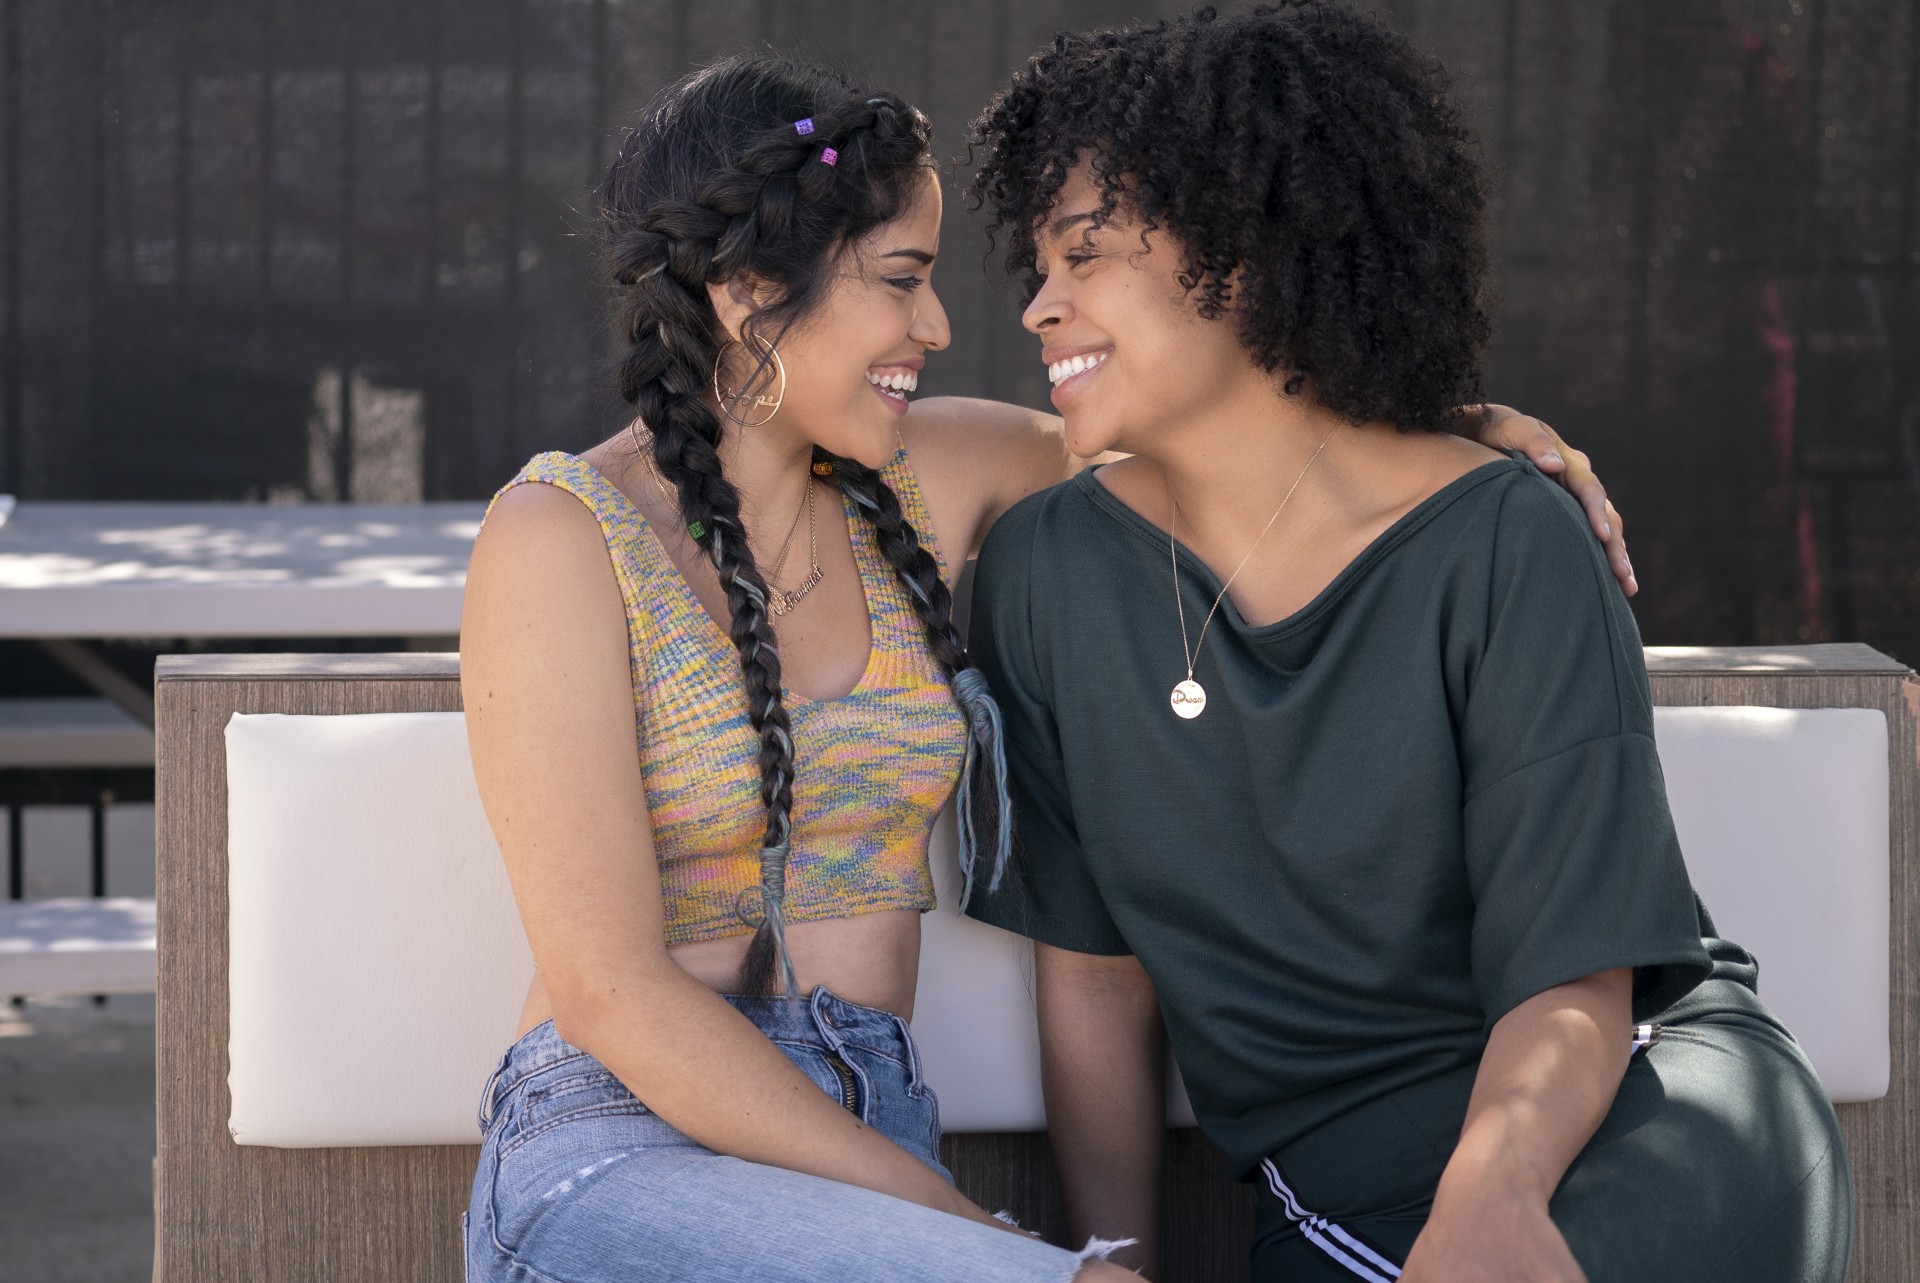 Still from the series "Gentefied" shows two people sitting on a bench. One wraps their arm around the other as they both lean in and smile at each other.